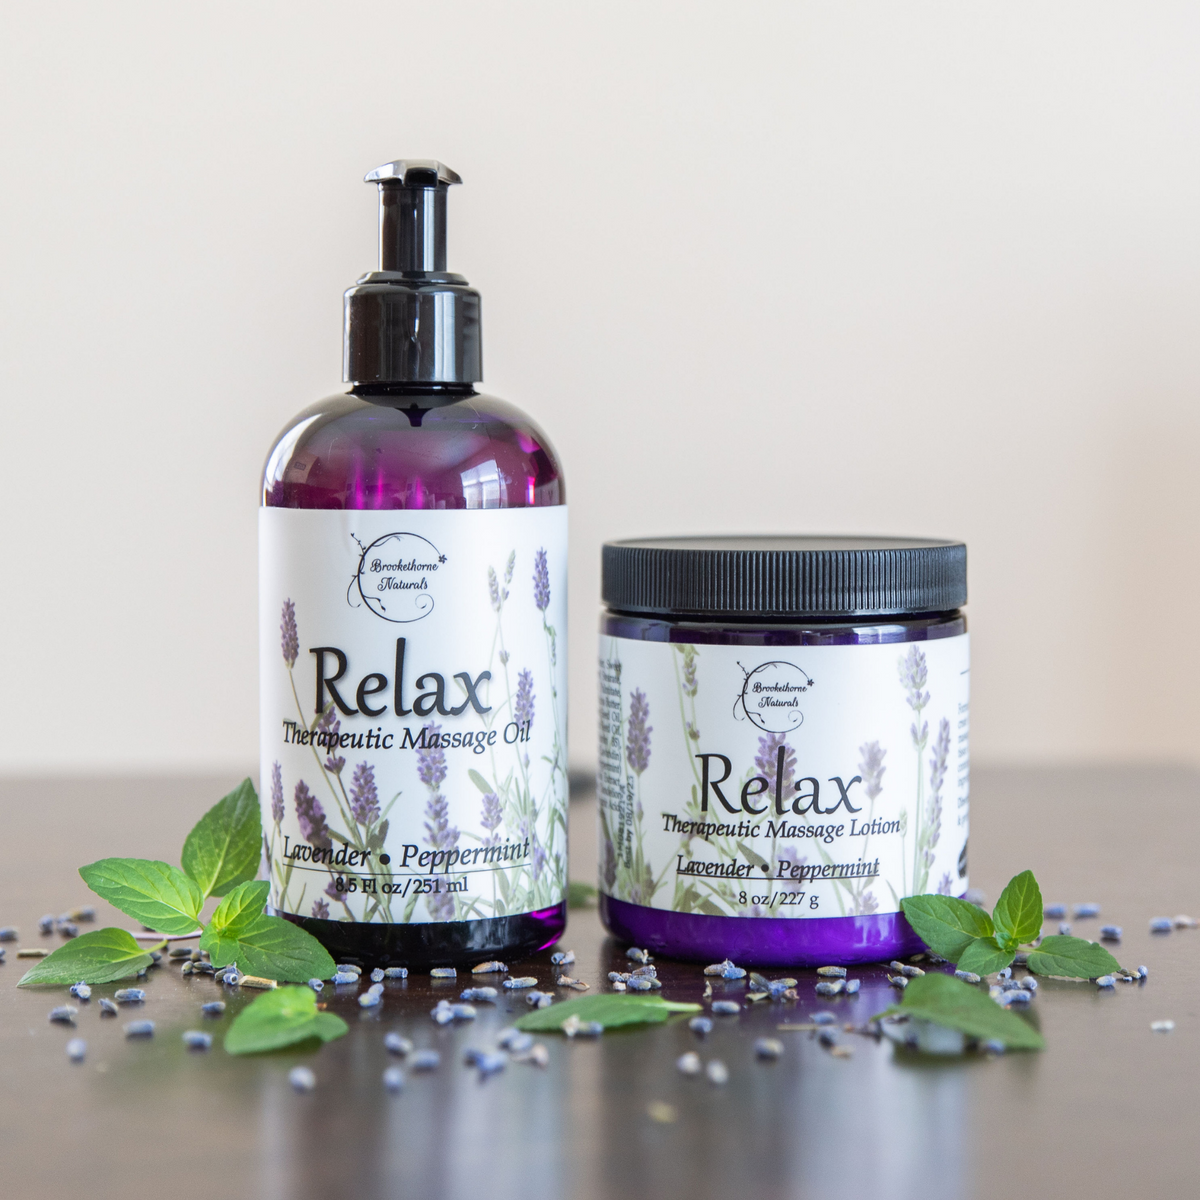 Just Relax Bundle, Relax Therapeutic Massage Oil and Relax Therapeutic Massage Lotion surrounded by lavender seeds.